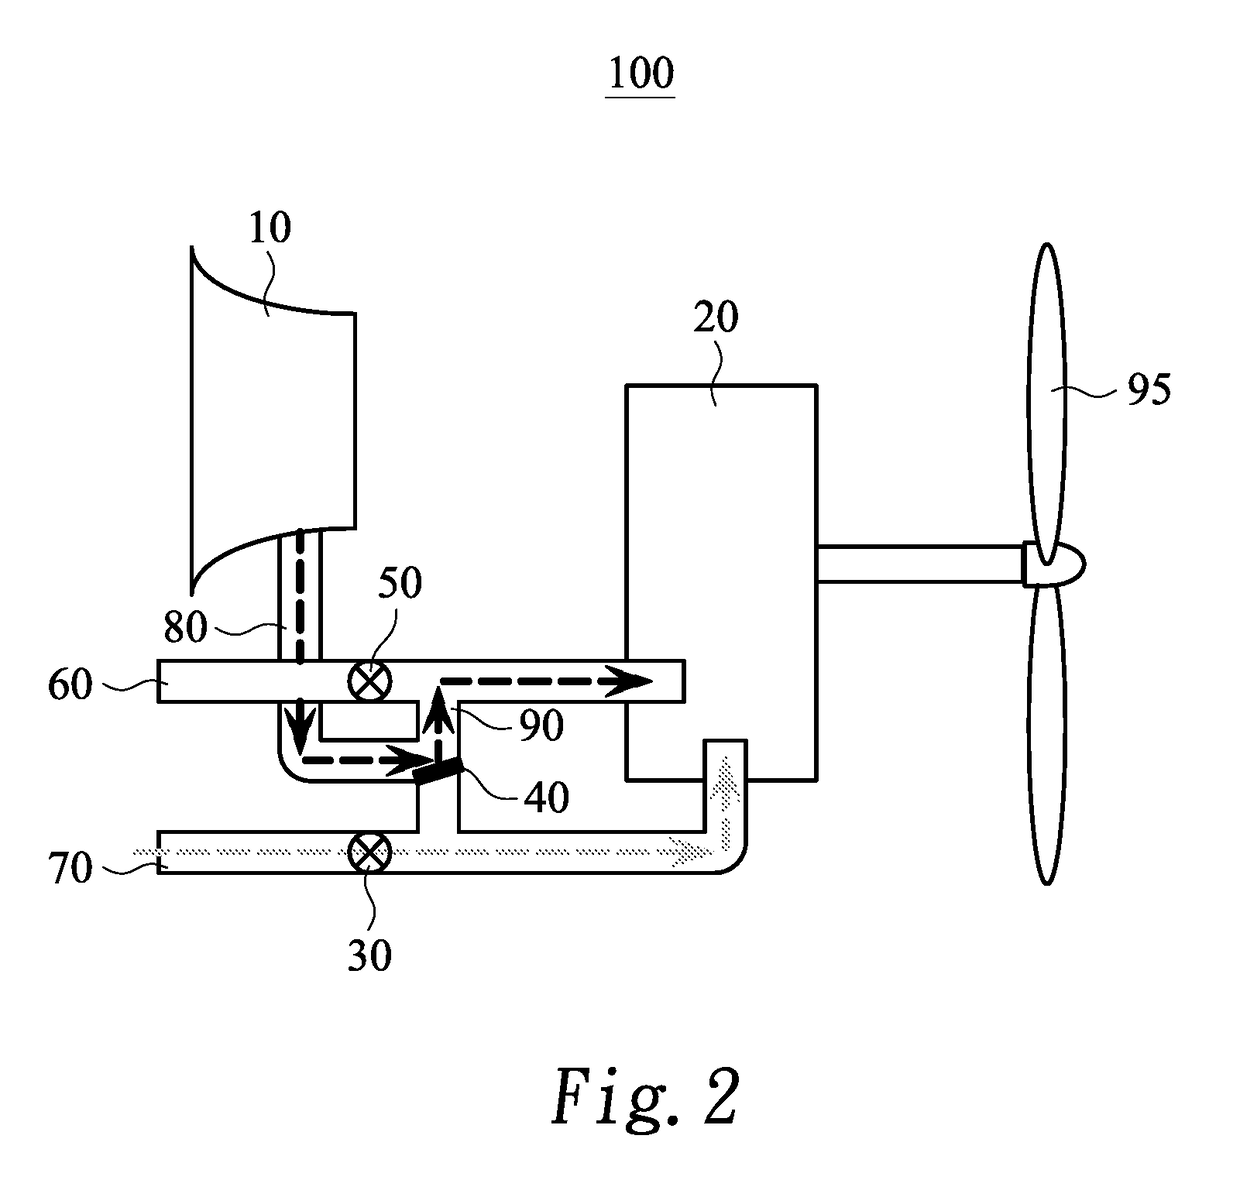 Device for internal cooling and pressurization of rotary engine